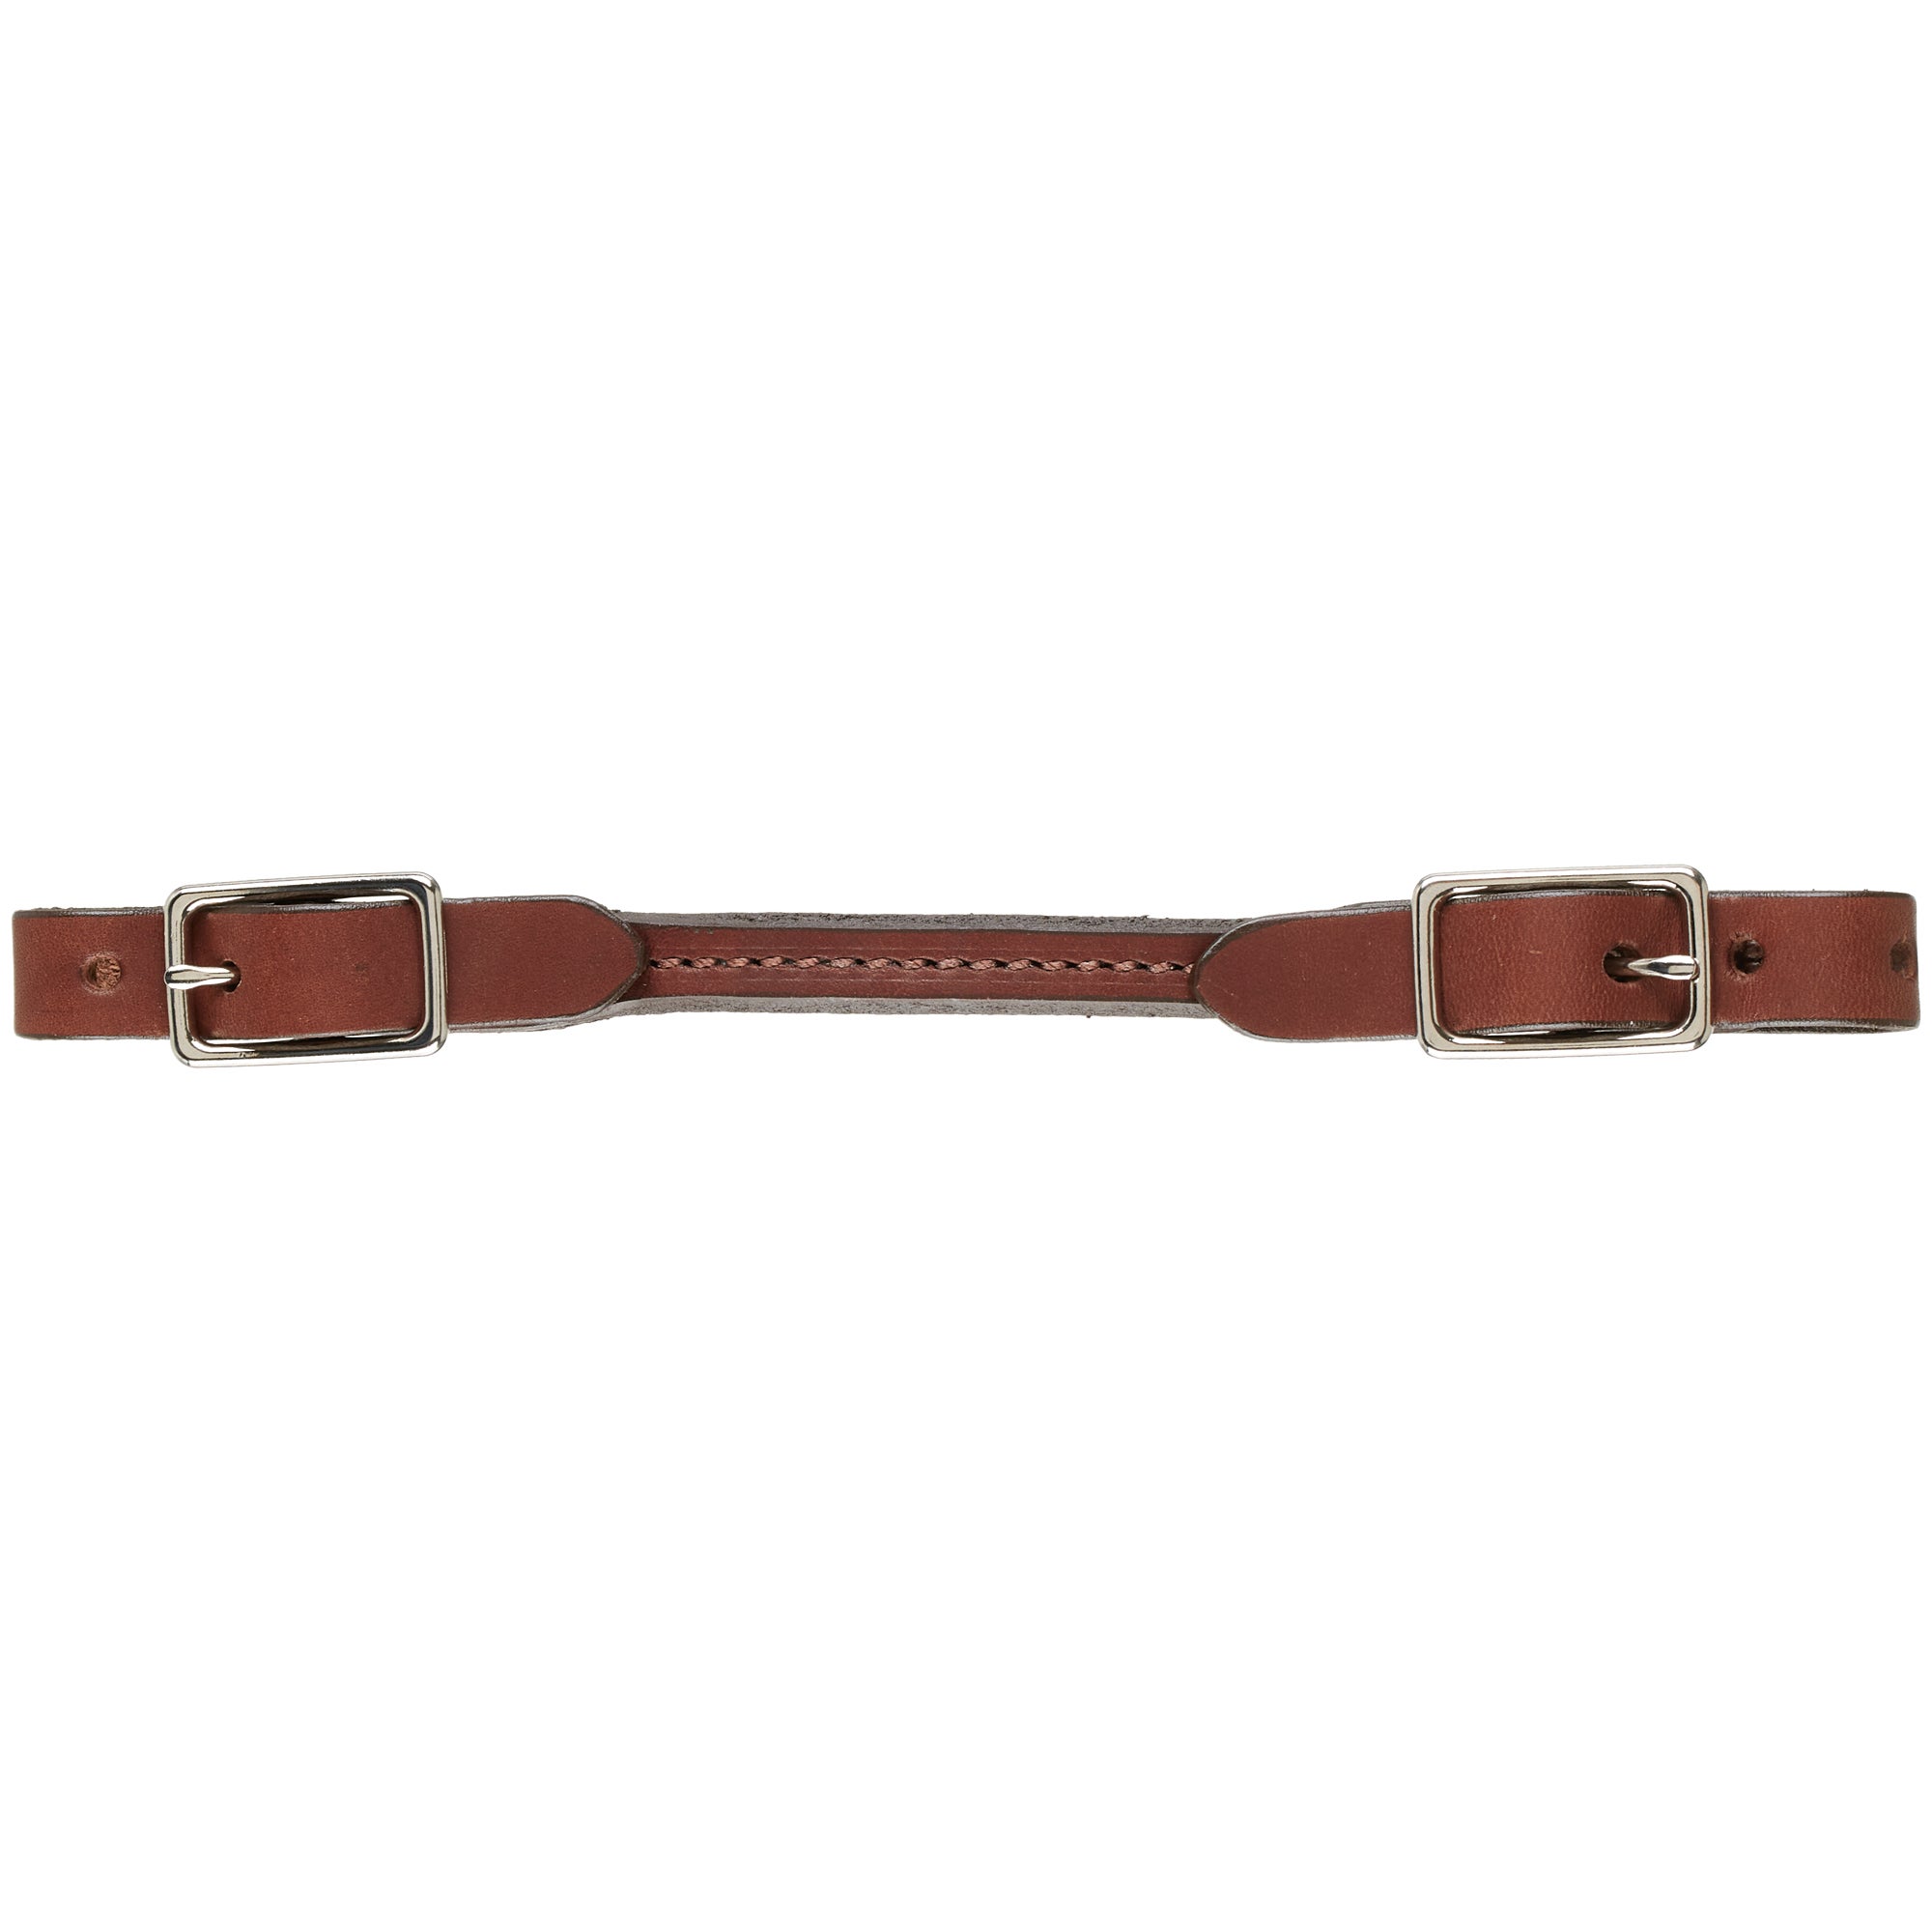 Weaver Leather Harness Leather Nickel Plated Hardware Rounded Curb Strap Russet 